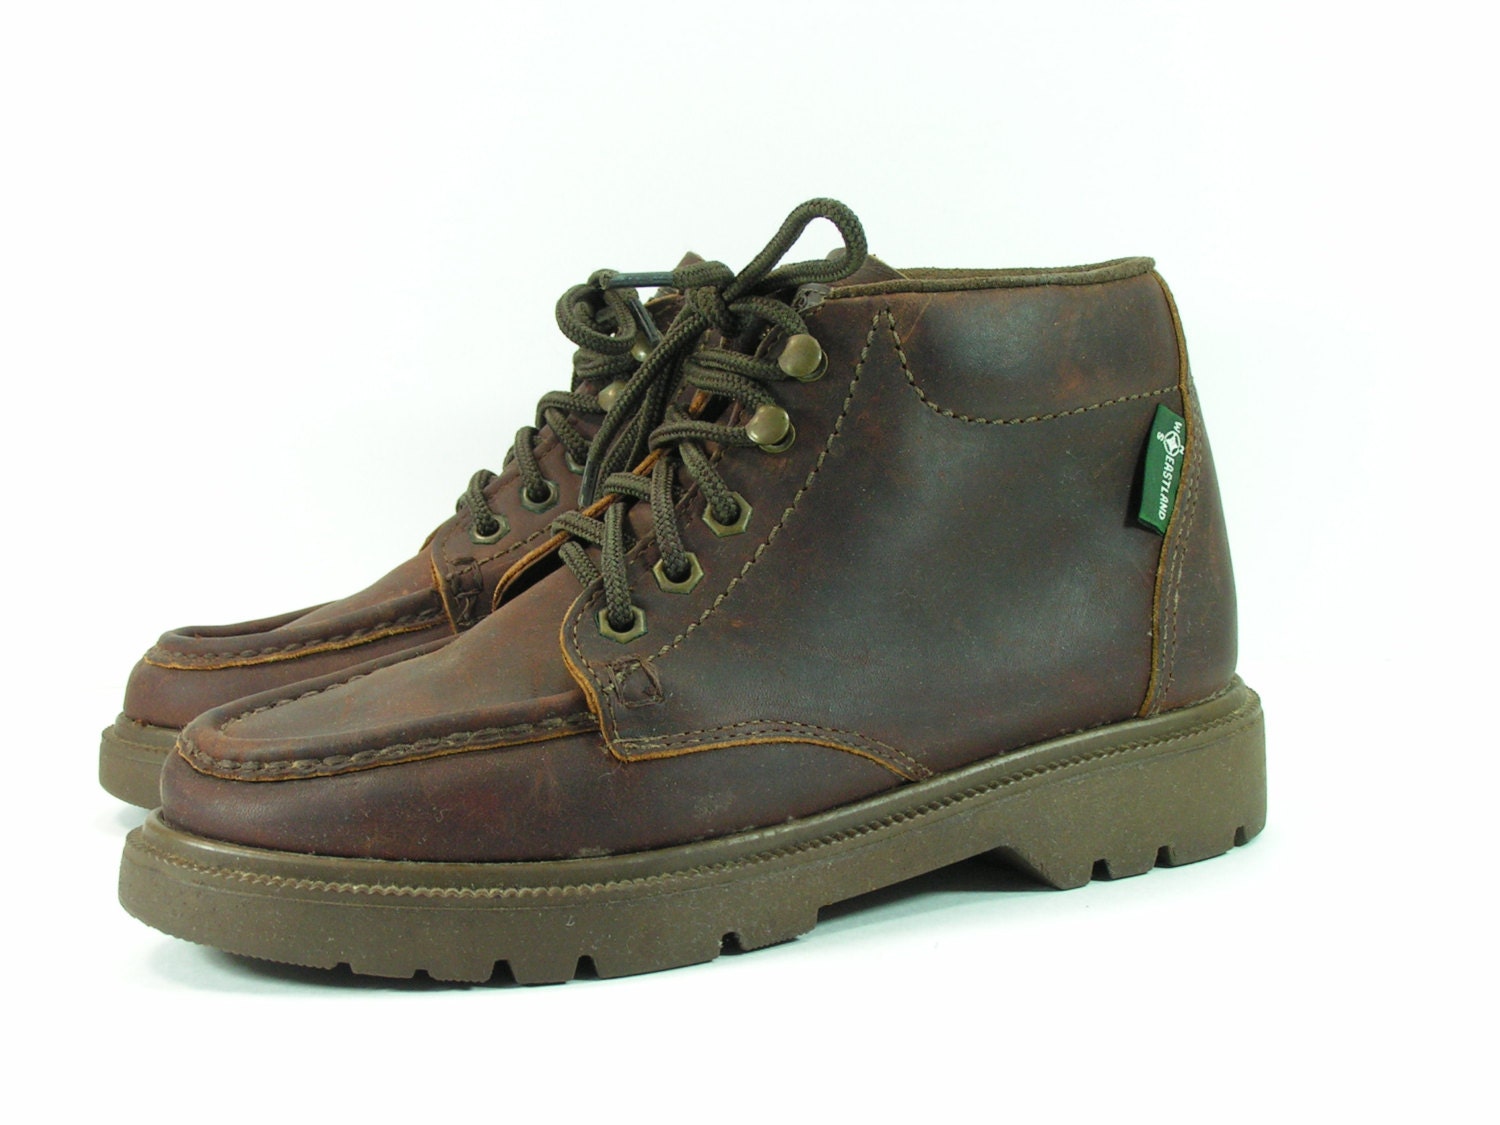 eastland chukka boots women's 8.5 M brown leather ankle